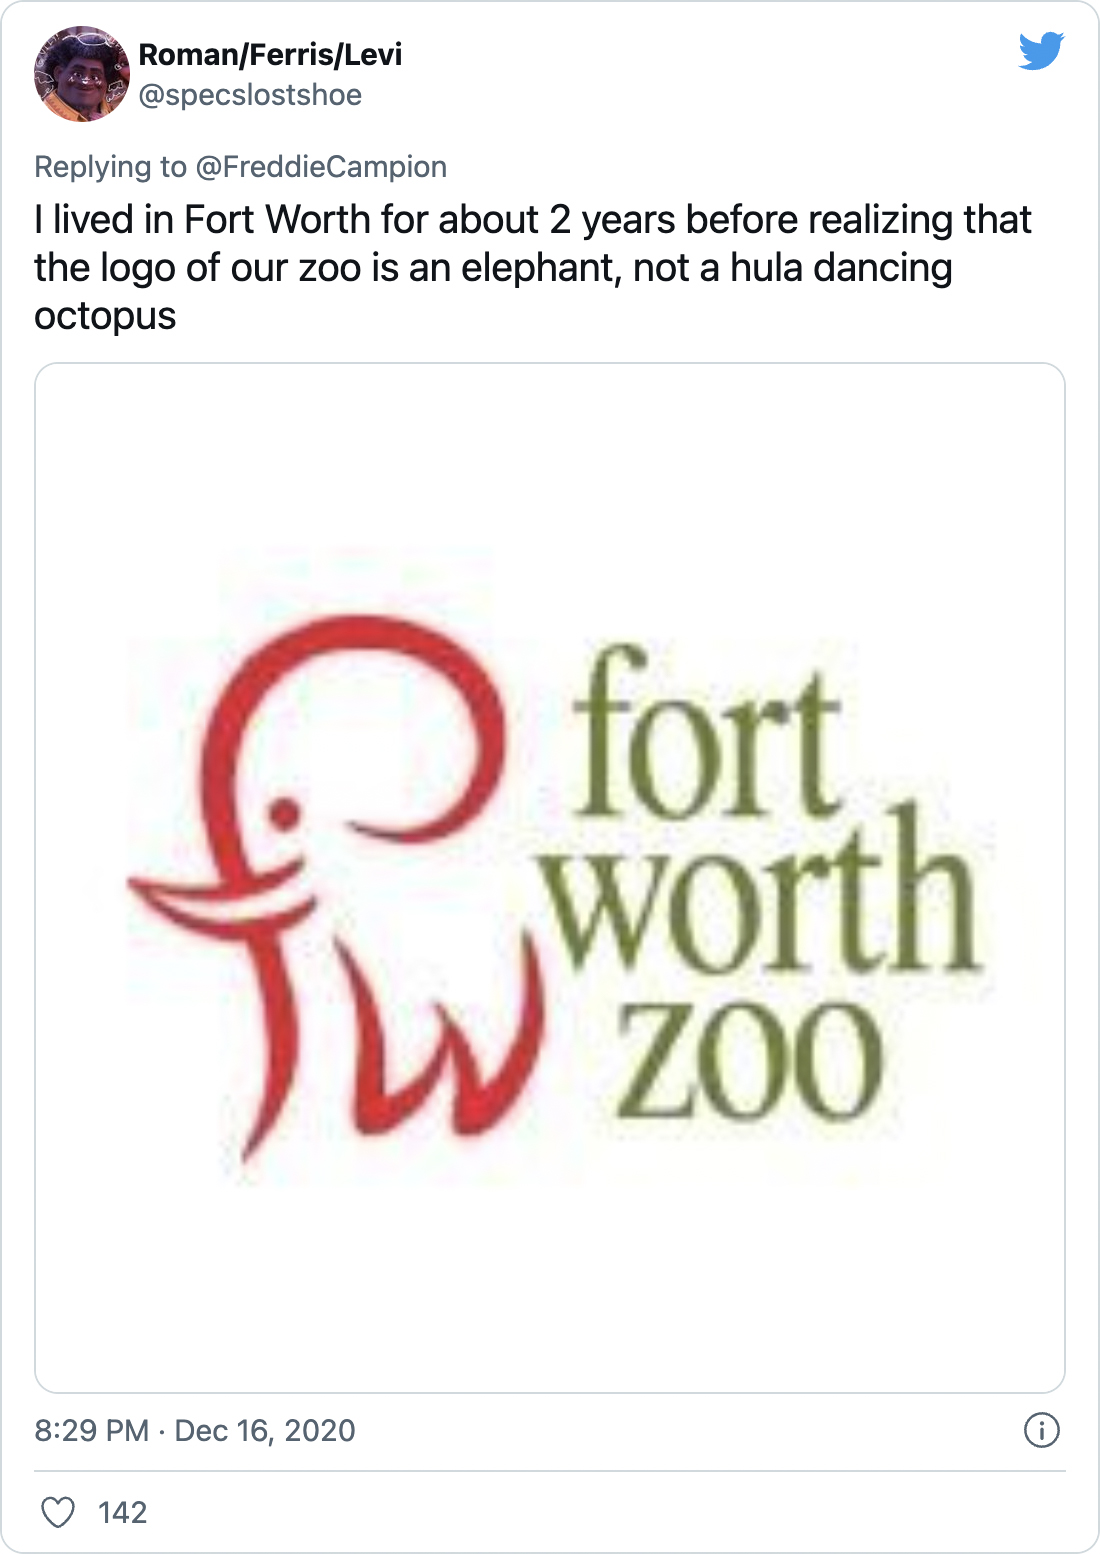 I lived in Fort Worth for about 2 years before realizing that the logo of our zoo is an elephant, not a hula dancing octopus - @specslostshoe